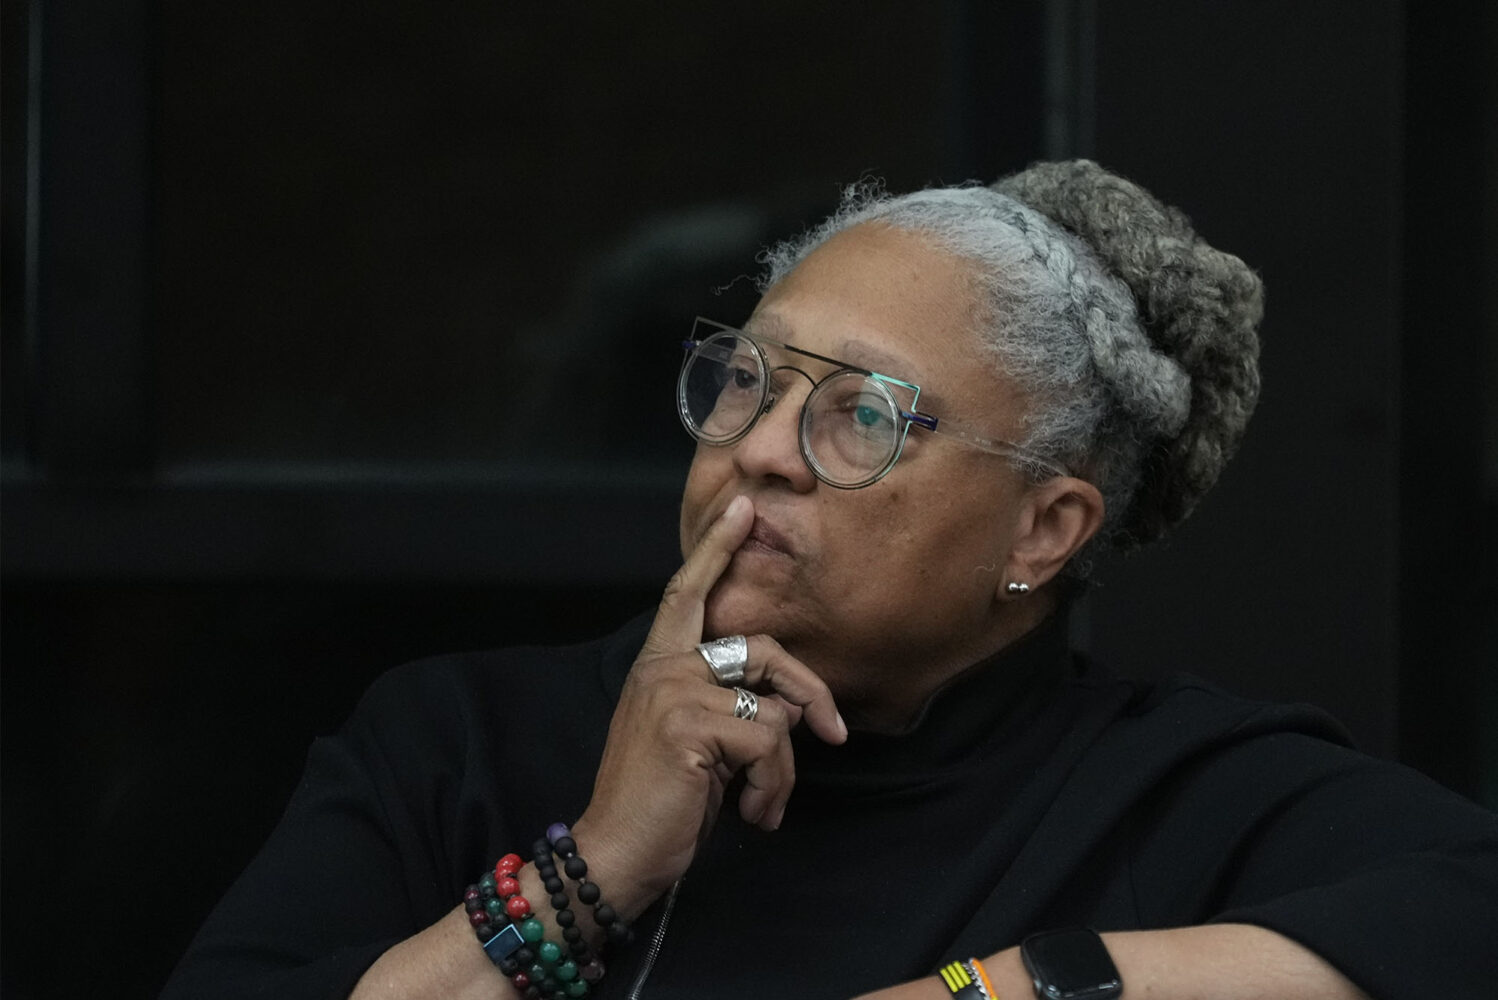 Photo: A black woman wearing multiple bracelets sits with a pensive and serious expression in this portrait in front of a black background